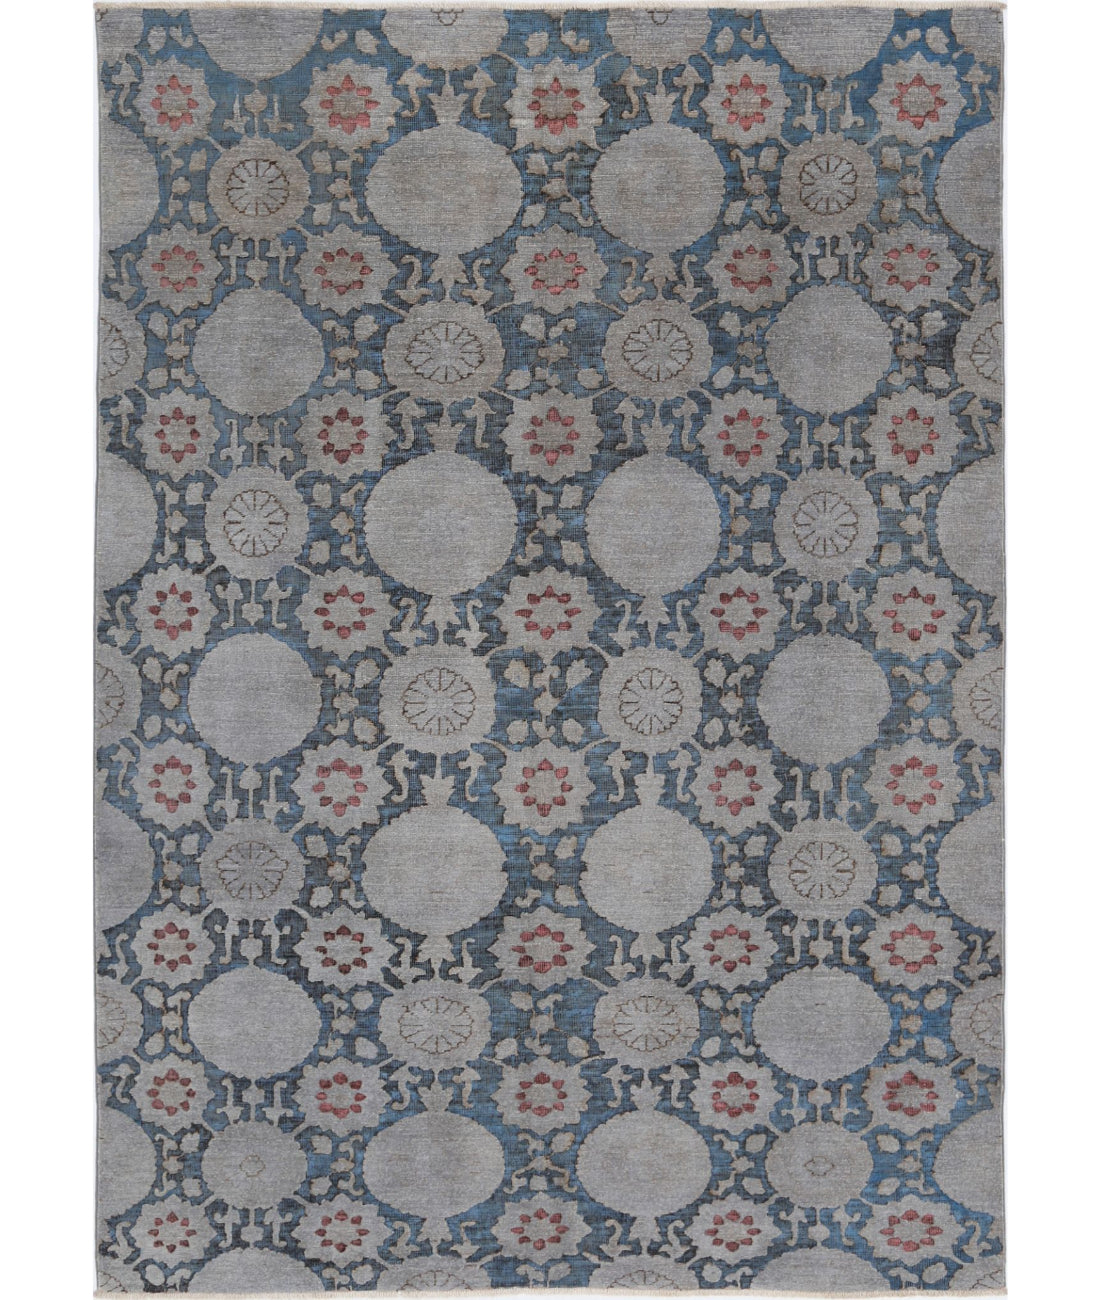 Hand Knotted Onyx Wool Rug - 5'9'' x 8'3'' -5018726